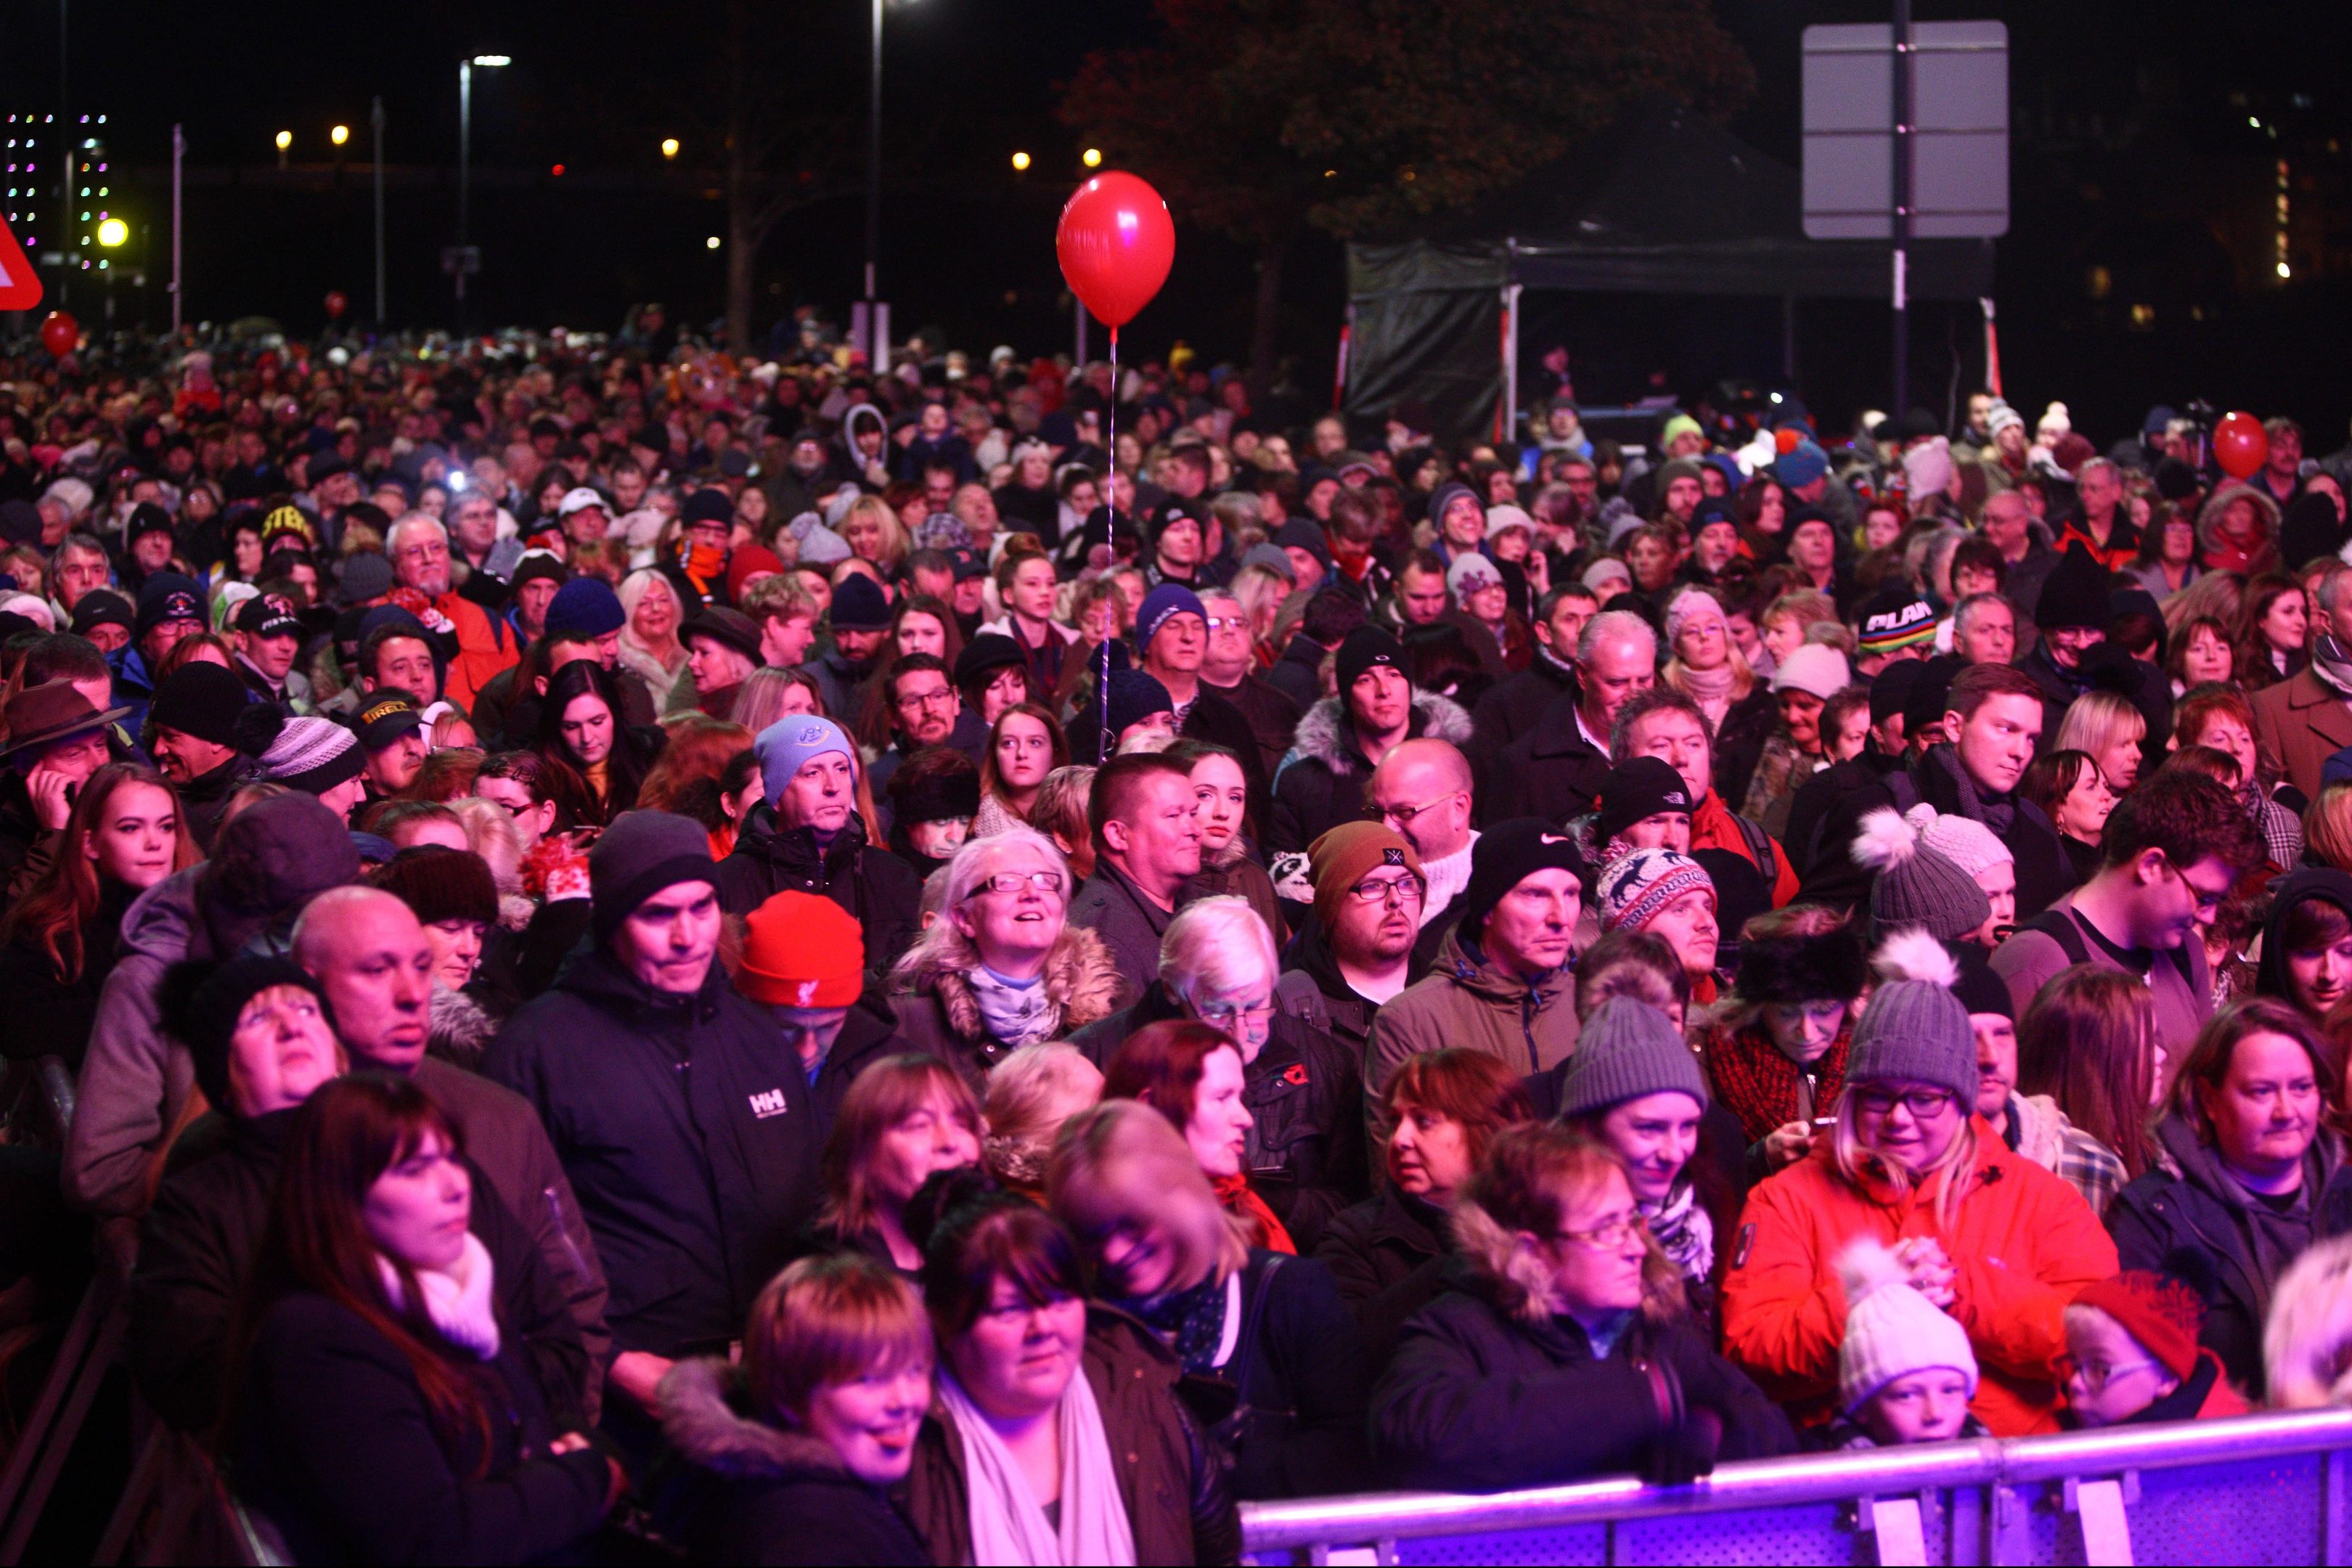 Hopes are high that people will turn out in force for the St Andrew's Day celebrations like they did for the Christmas lights switch on.